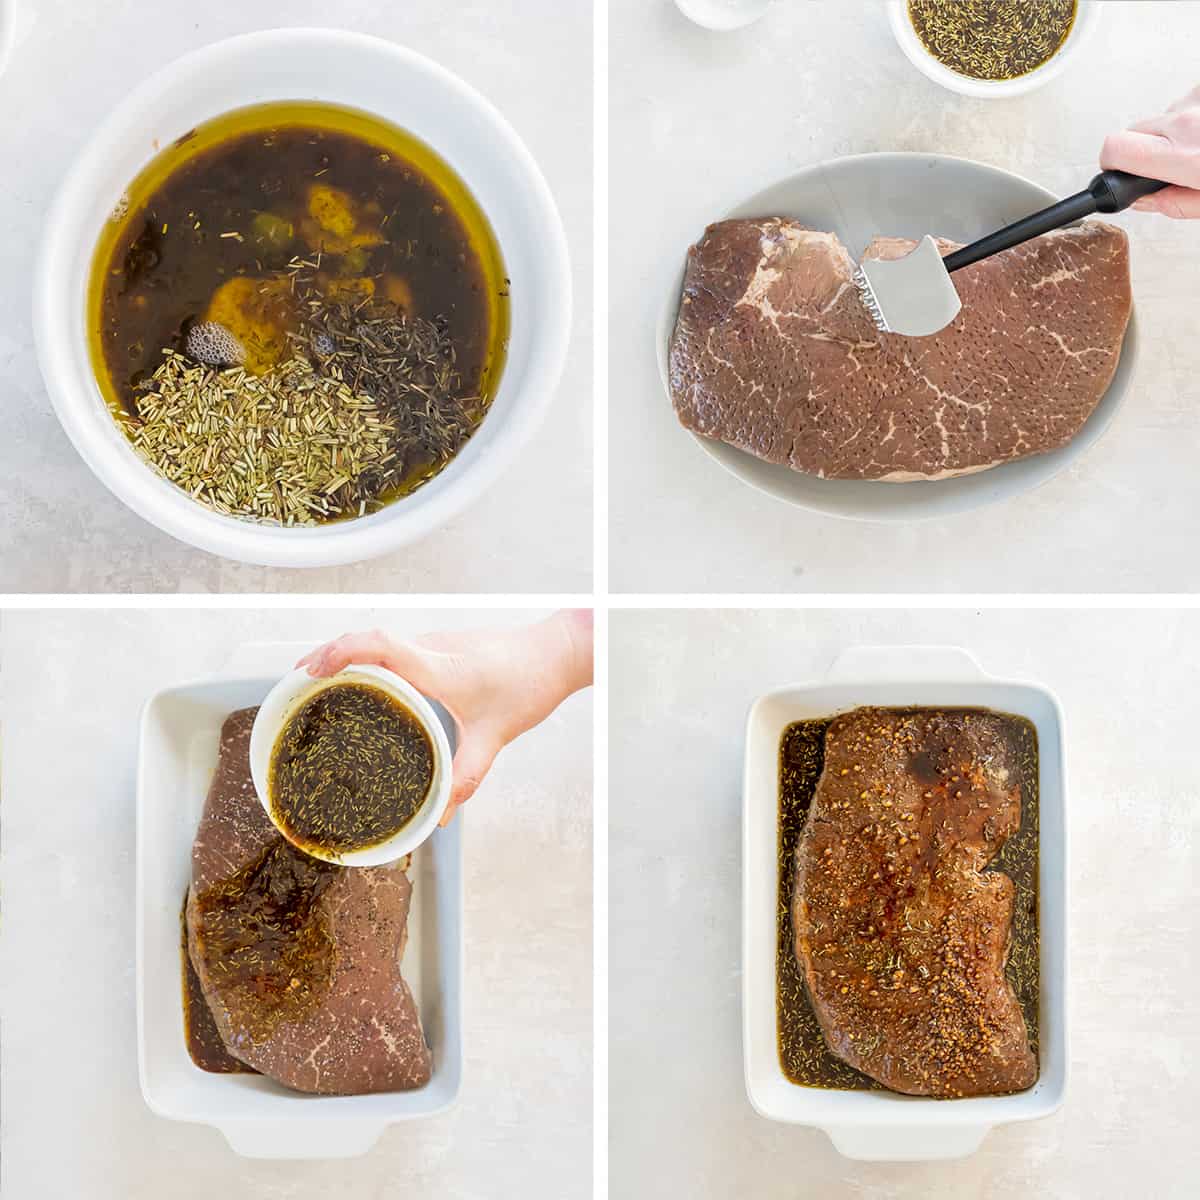 Four images of London broil marinade, a hand pounding a round steak with a meat mallet, and a top round steak in a dish with marinade.